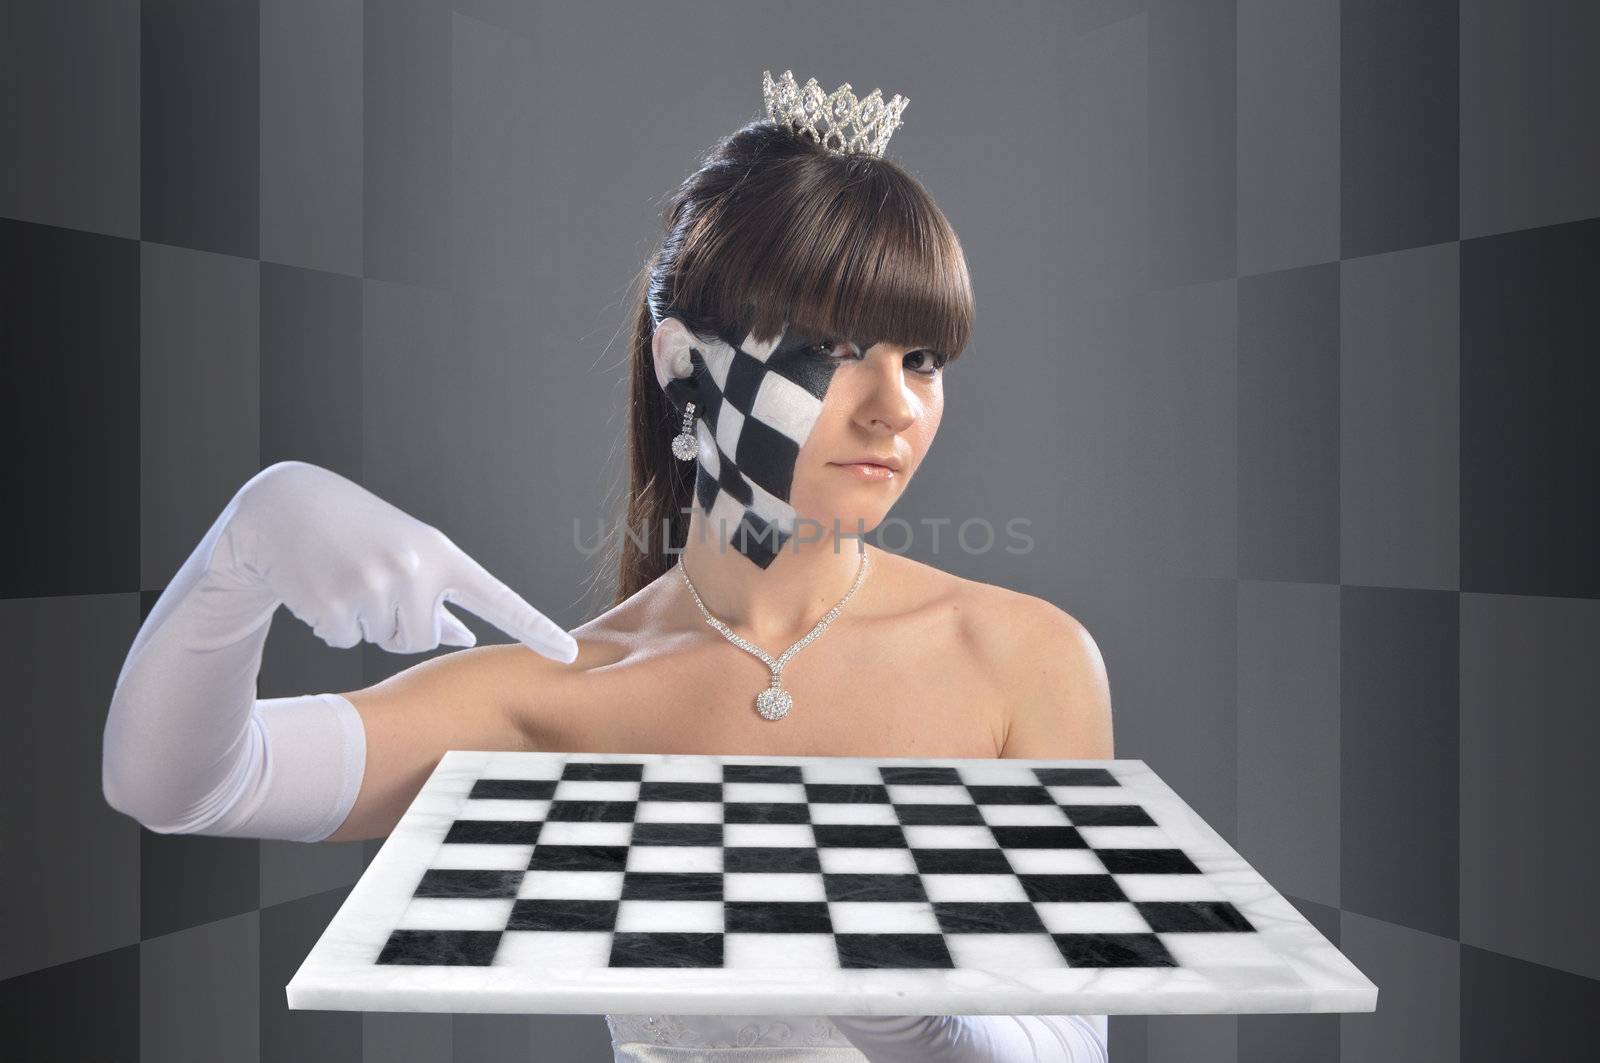 Chess queen by dyoma